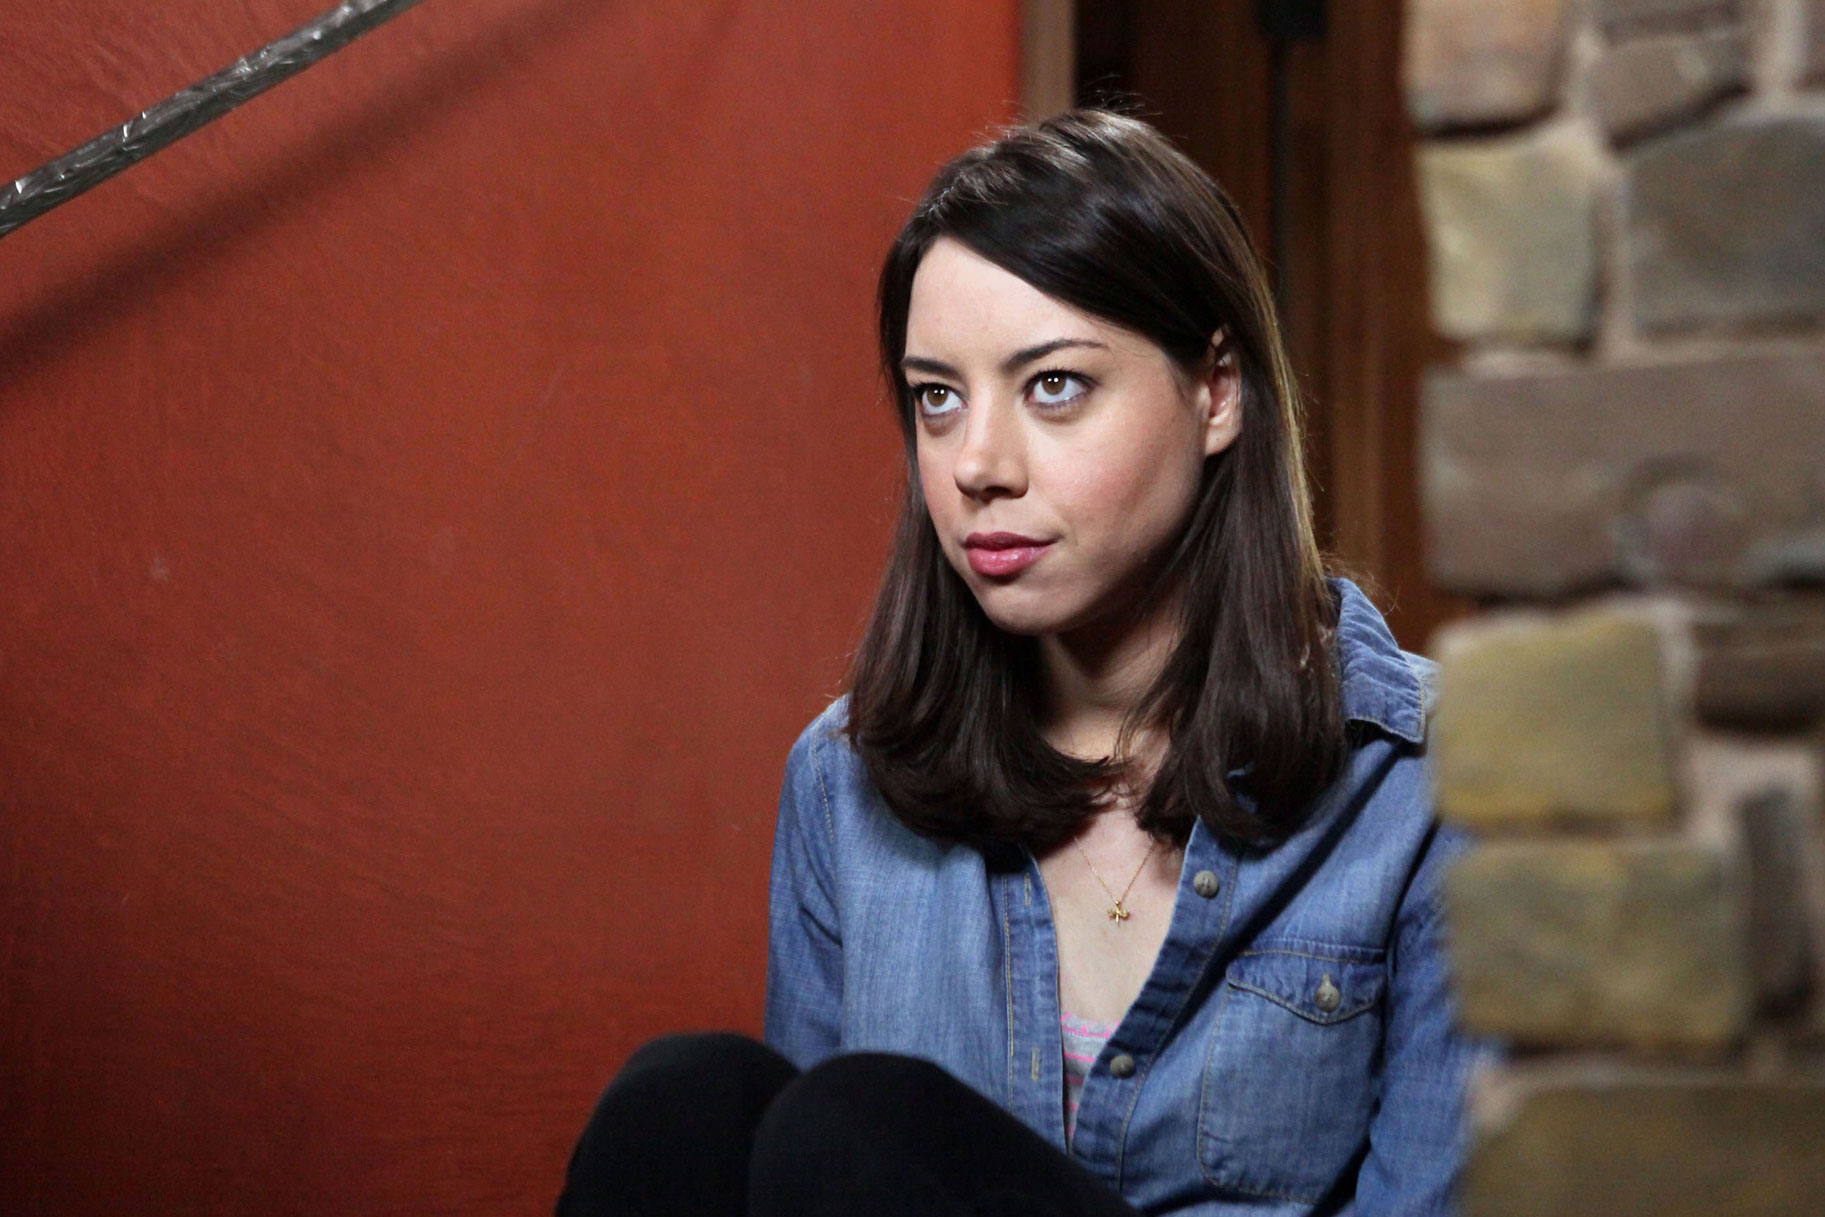 Who Is April Ludgate on Parks and Recreation?